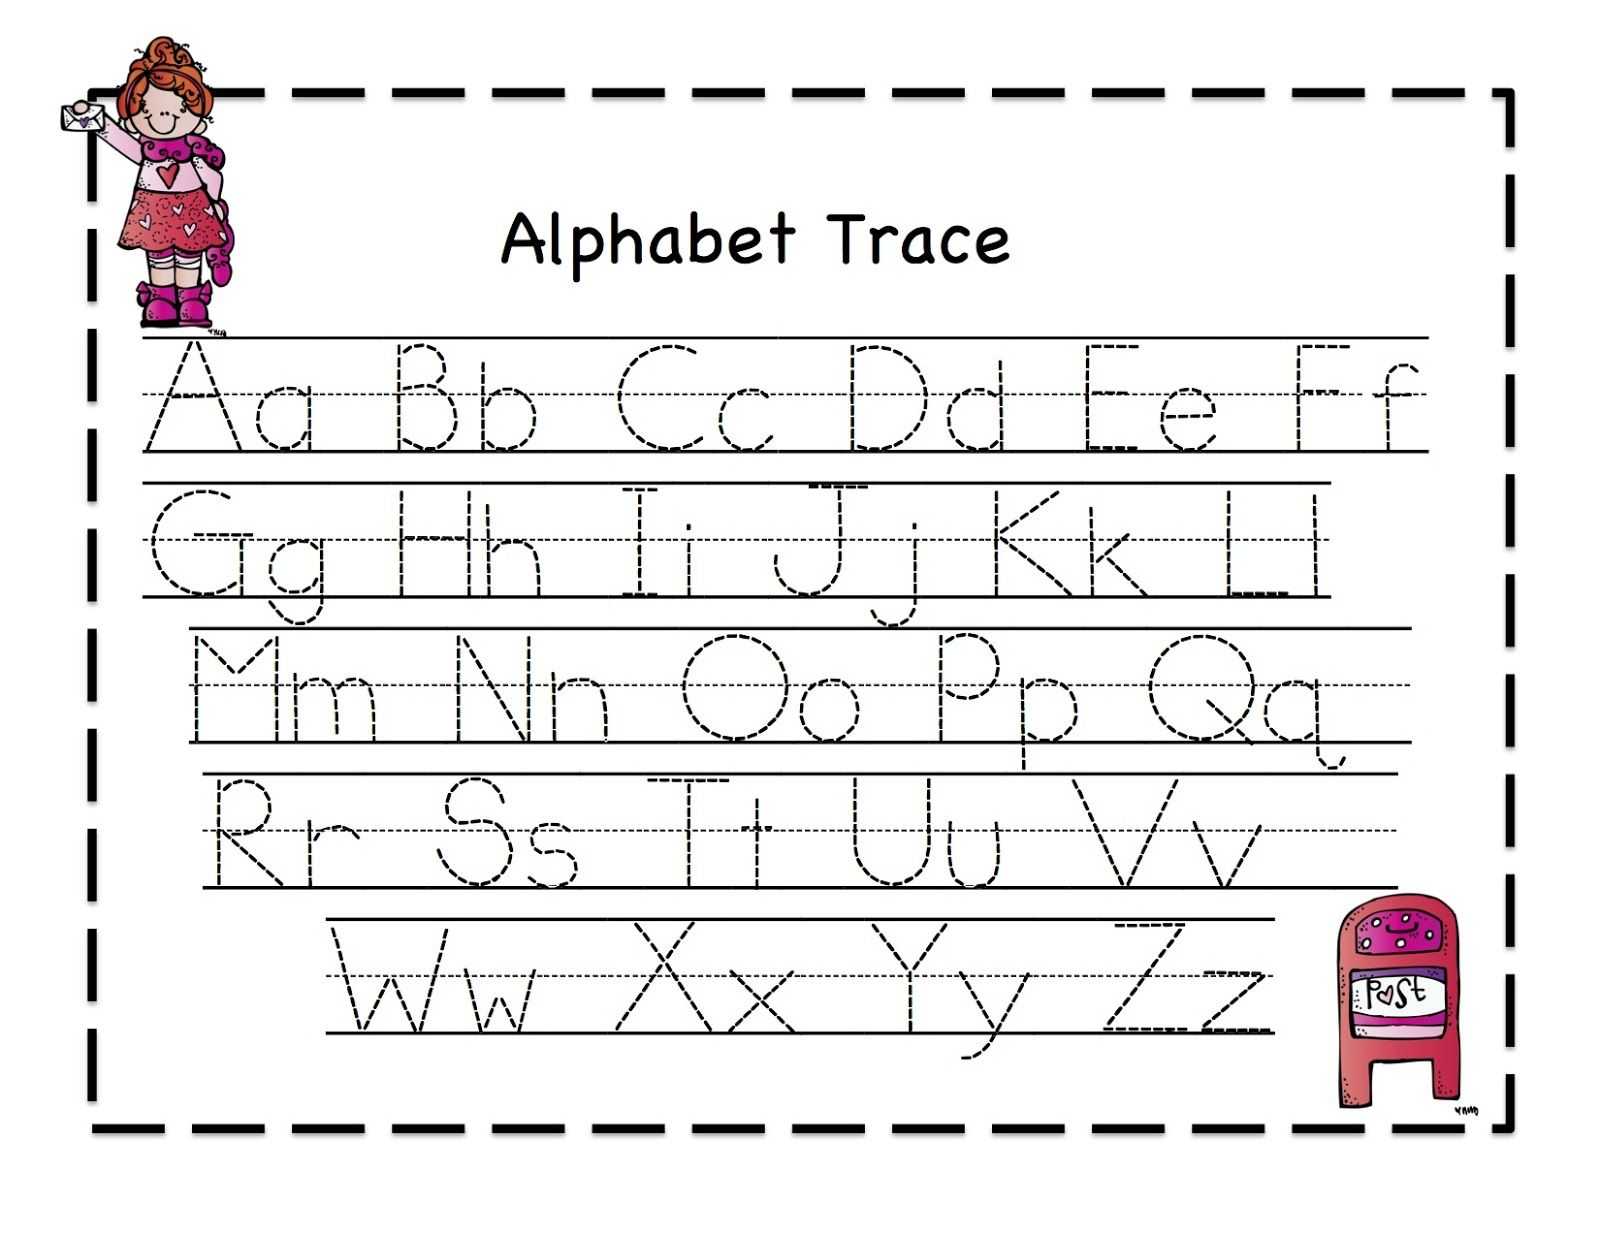 Preschool Number Worksheets Along with This Abc Tracing Sheets for Preschool Kids and Kindergarten Children